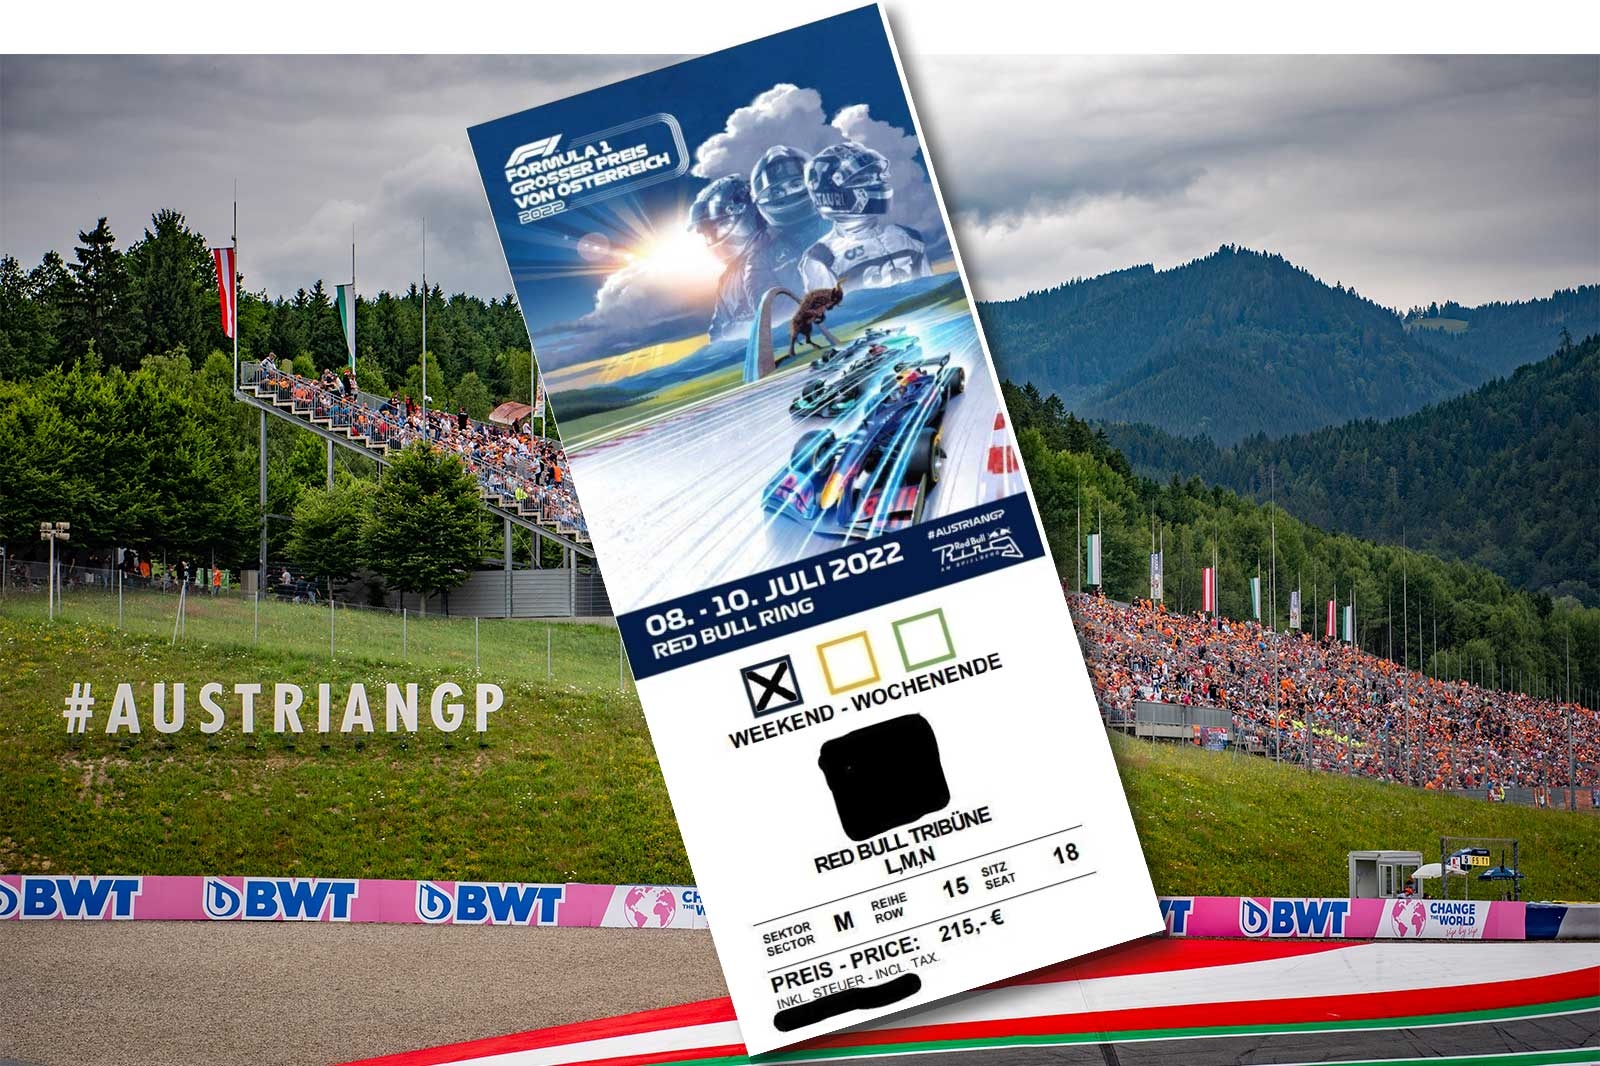 Where to buy Formula One tickets for the Austrian Grand Prix in Spielberg?